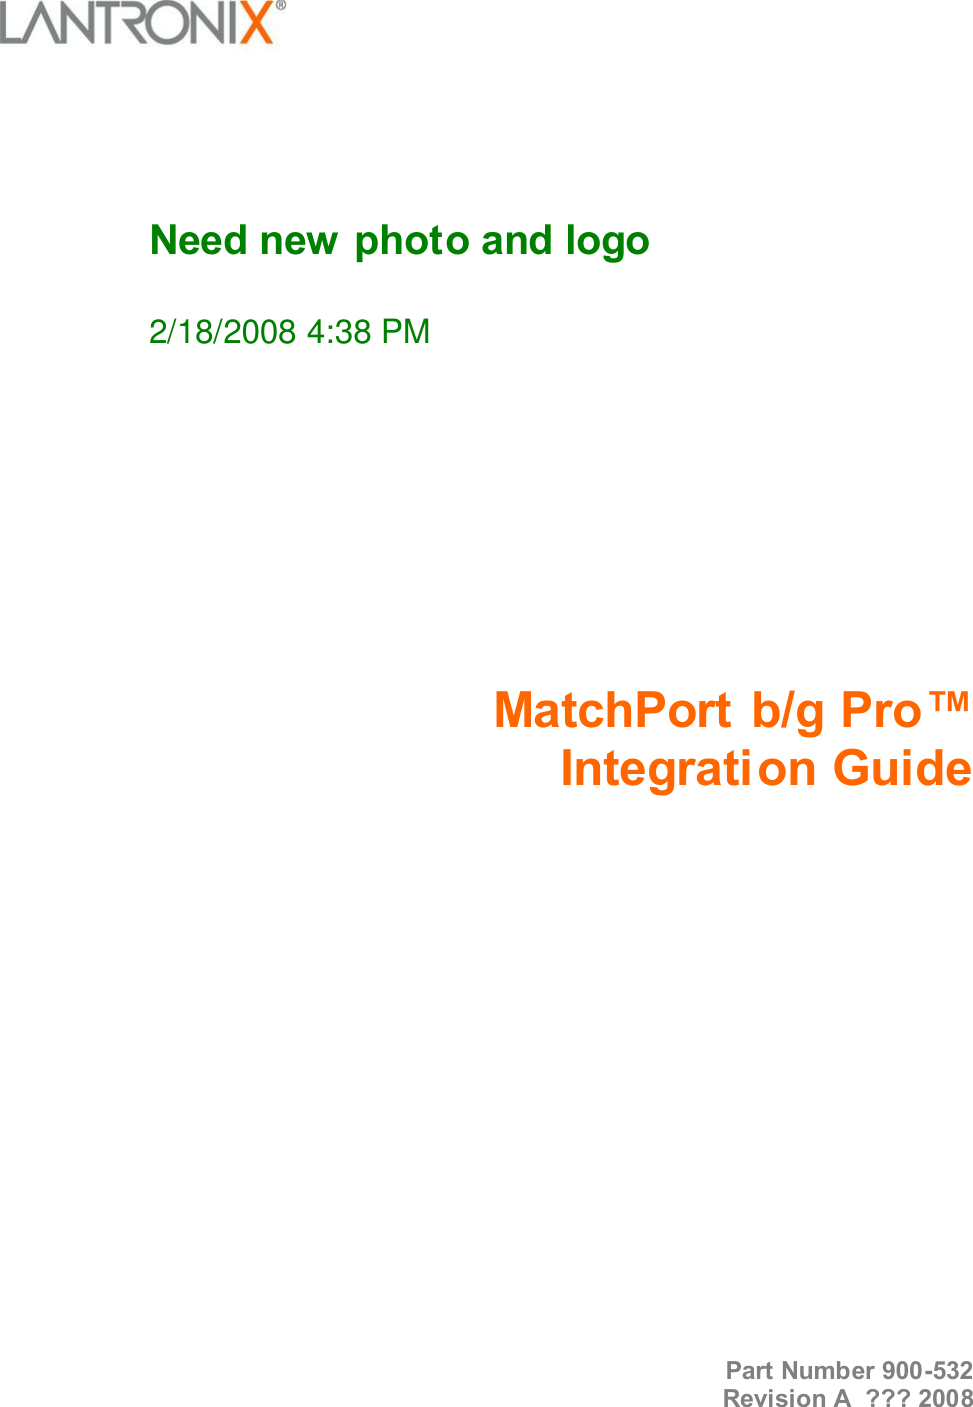      Need new  photo and logo   2/18/2008 4:38 PM        MatchPort b/g Pro™  Integration Guide                      Part Number 900-532 Revision A  ??? 2008 